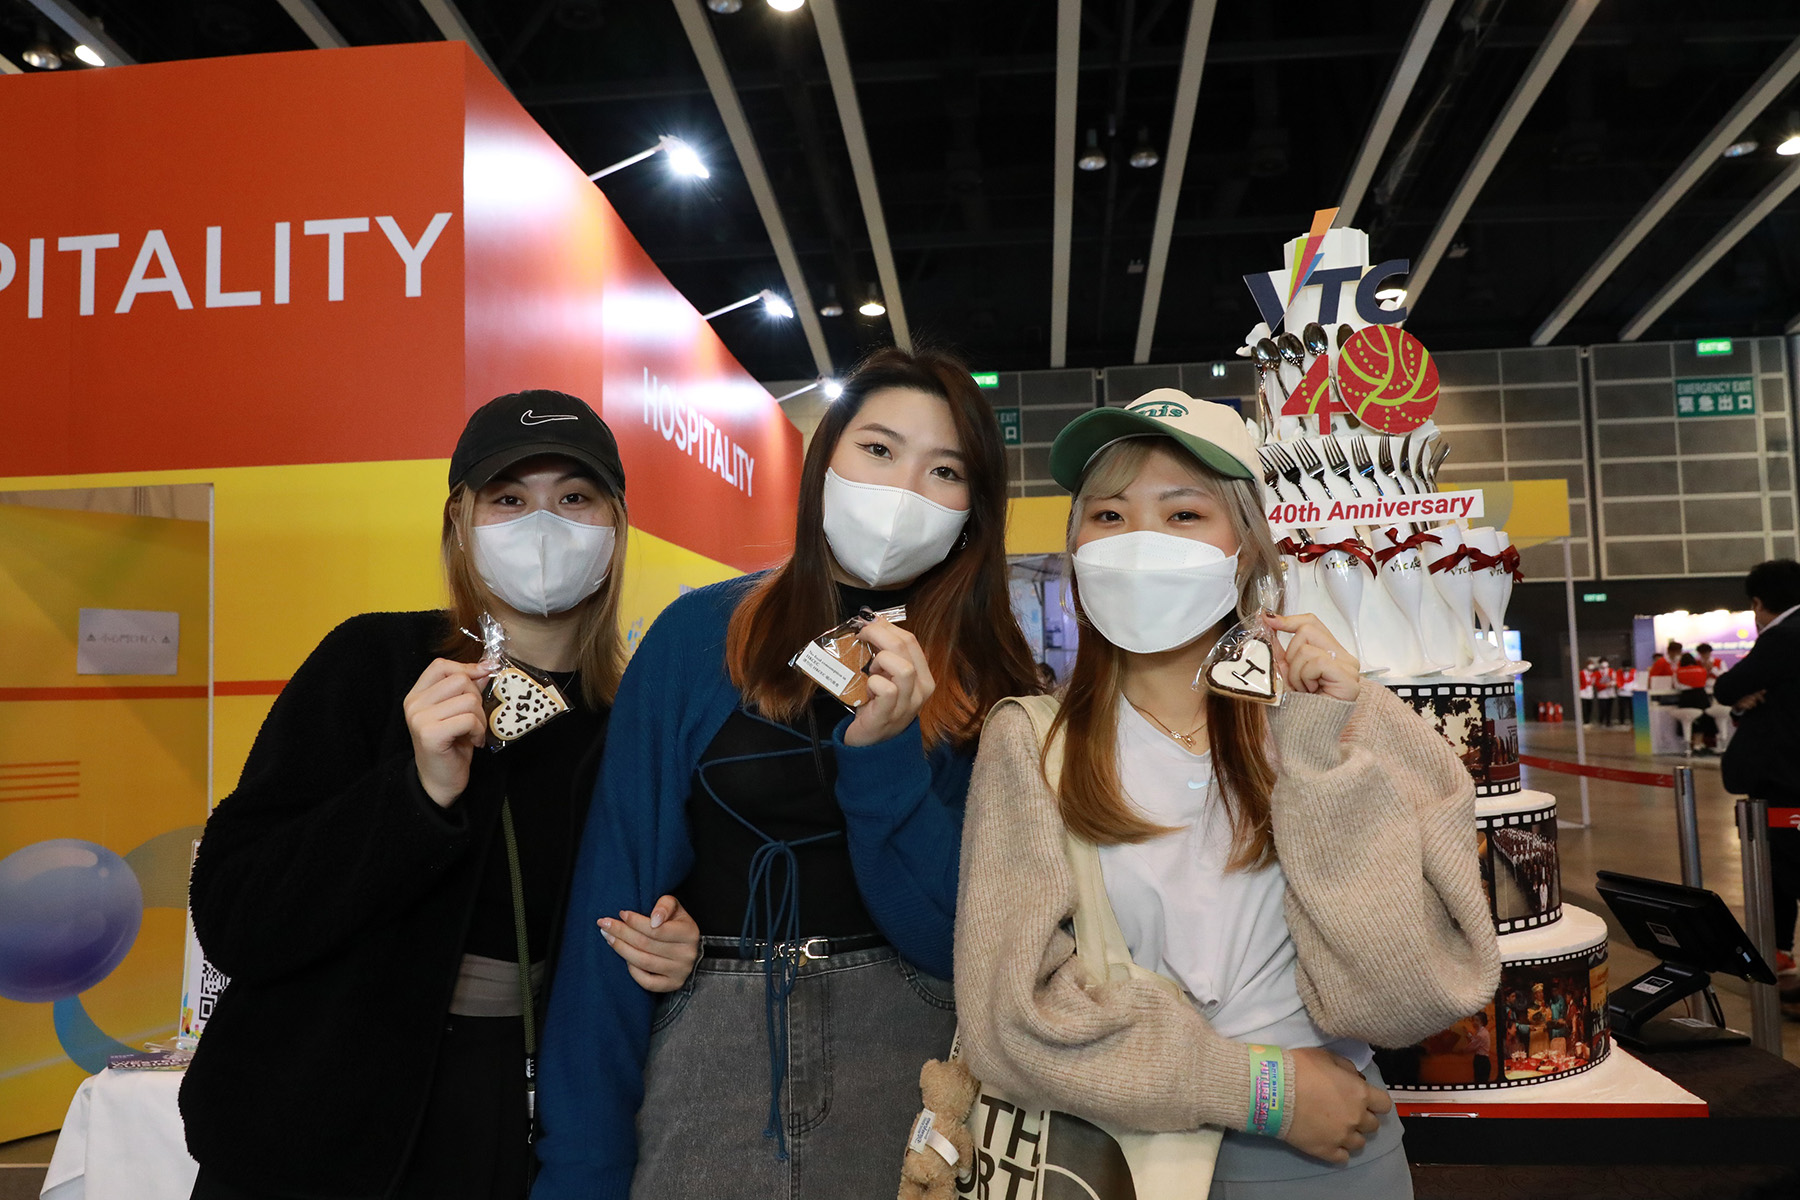 Visitors said that the rich activities of the Future Skills Community Event, which allowed them to experience the application of various innovative technologies and the “try-a-skills” booth. Public can understand more about the value of VPET